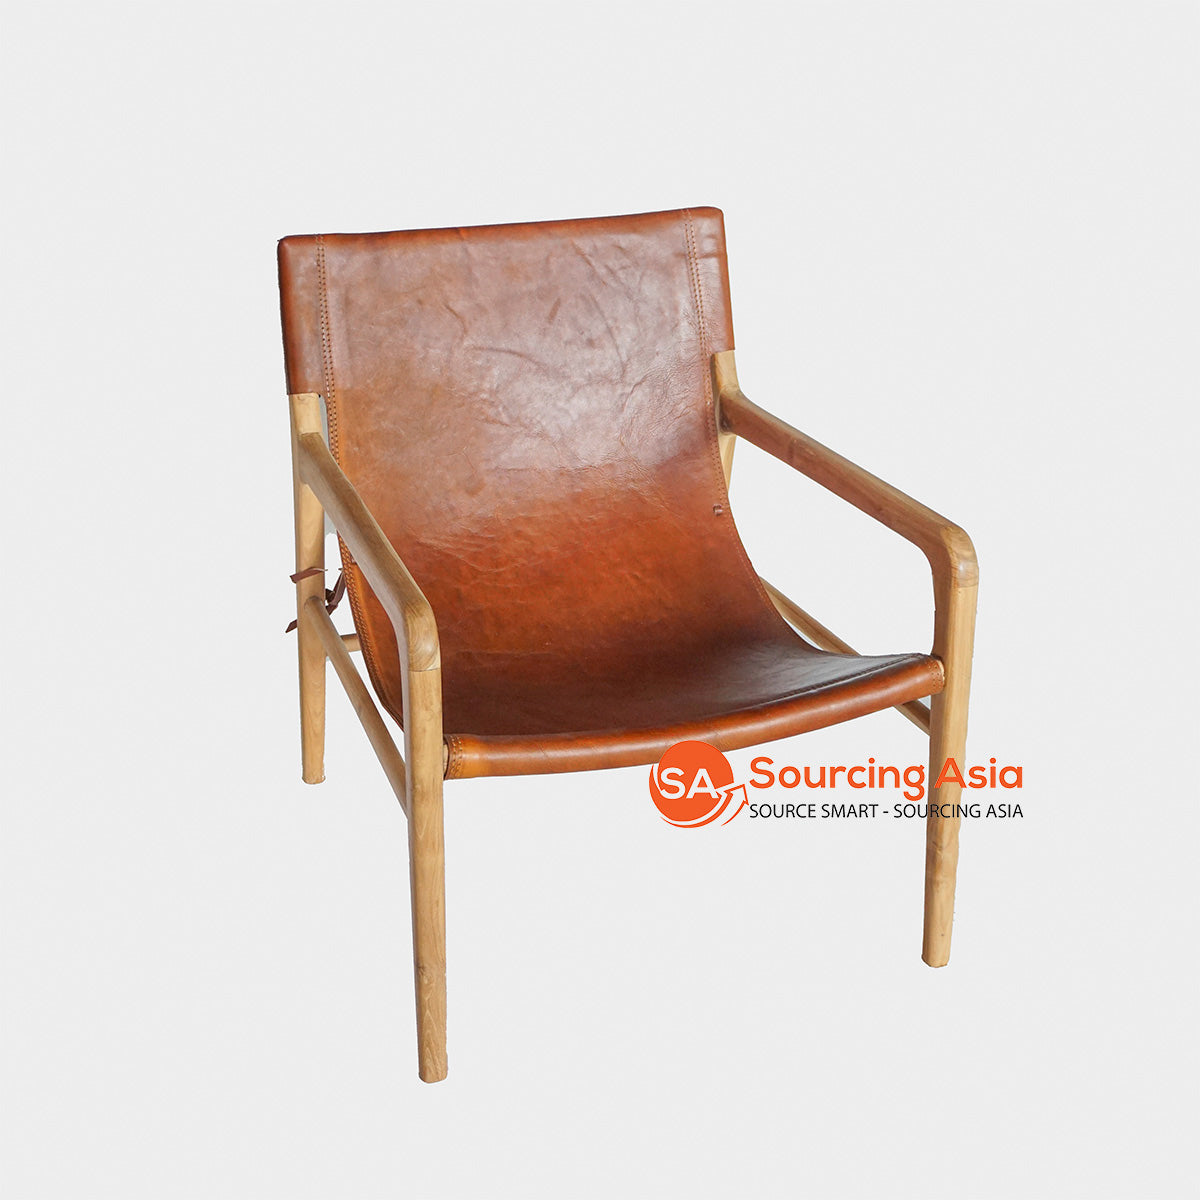 IJF016-8 TEAK CHAIR WITH LEATHER FULL BACK